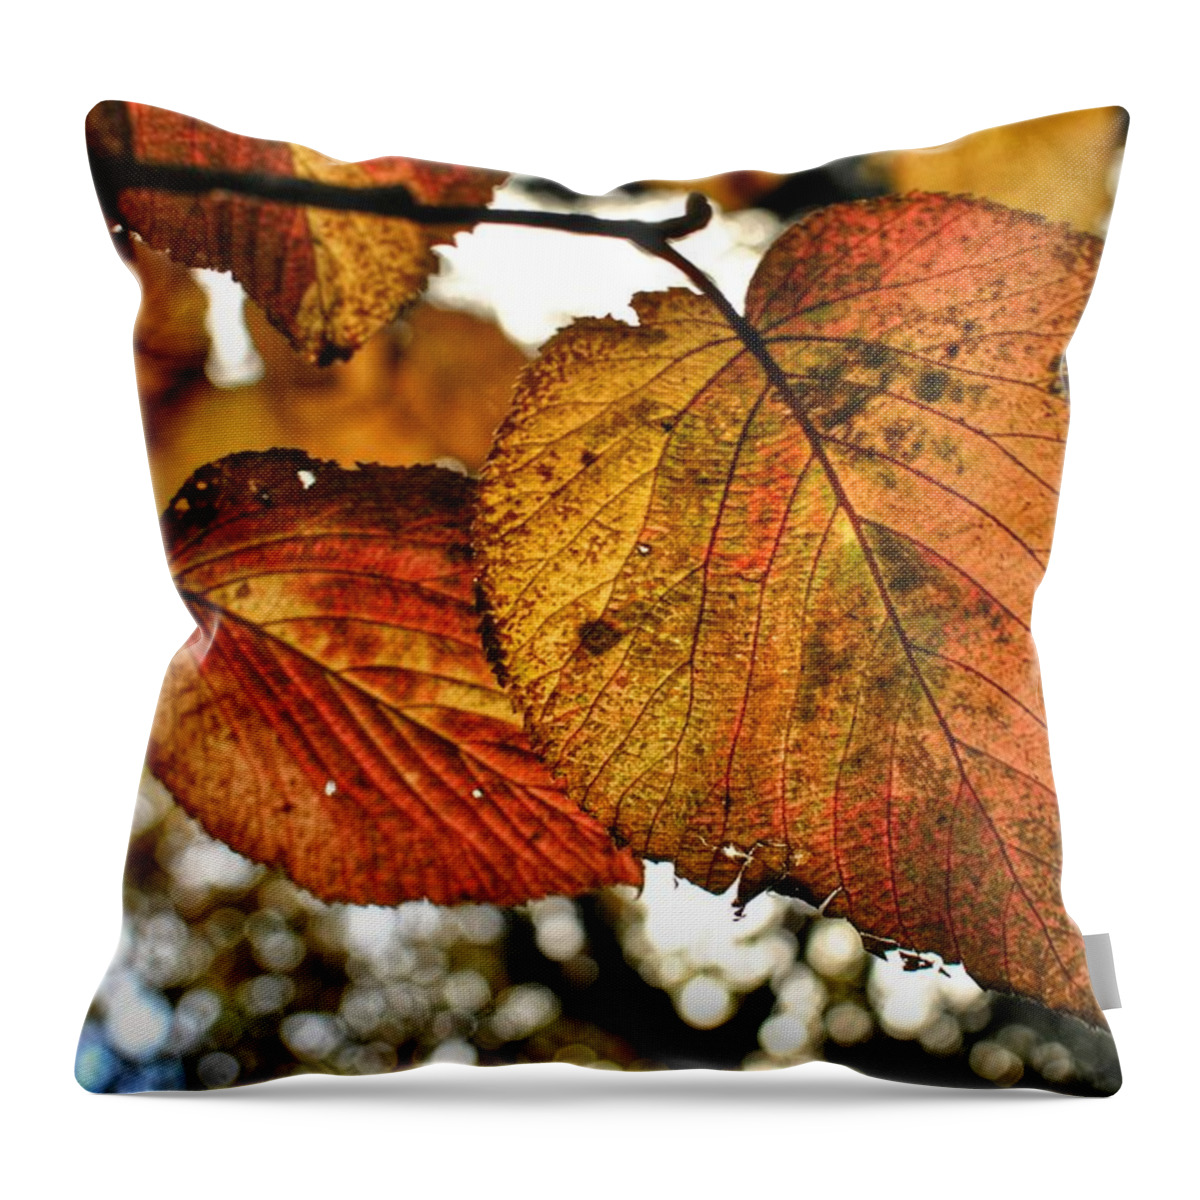 Fall Leaves Throw Pillow featuring the photograph Fall Leaves by Doug Ash